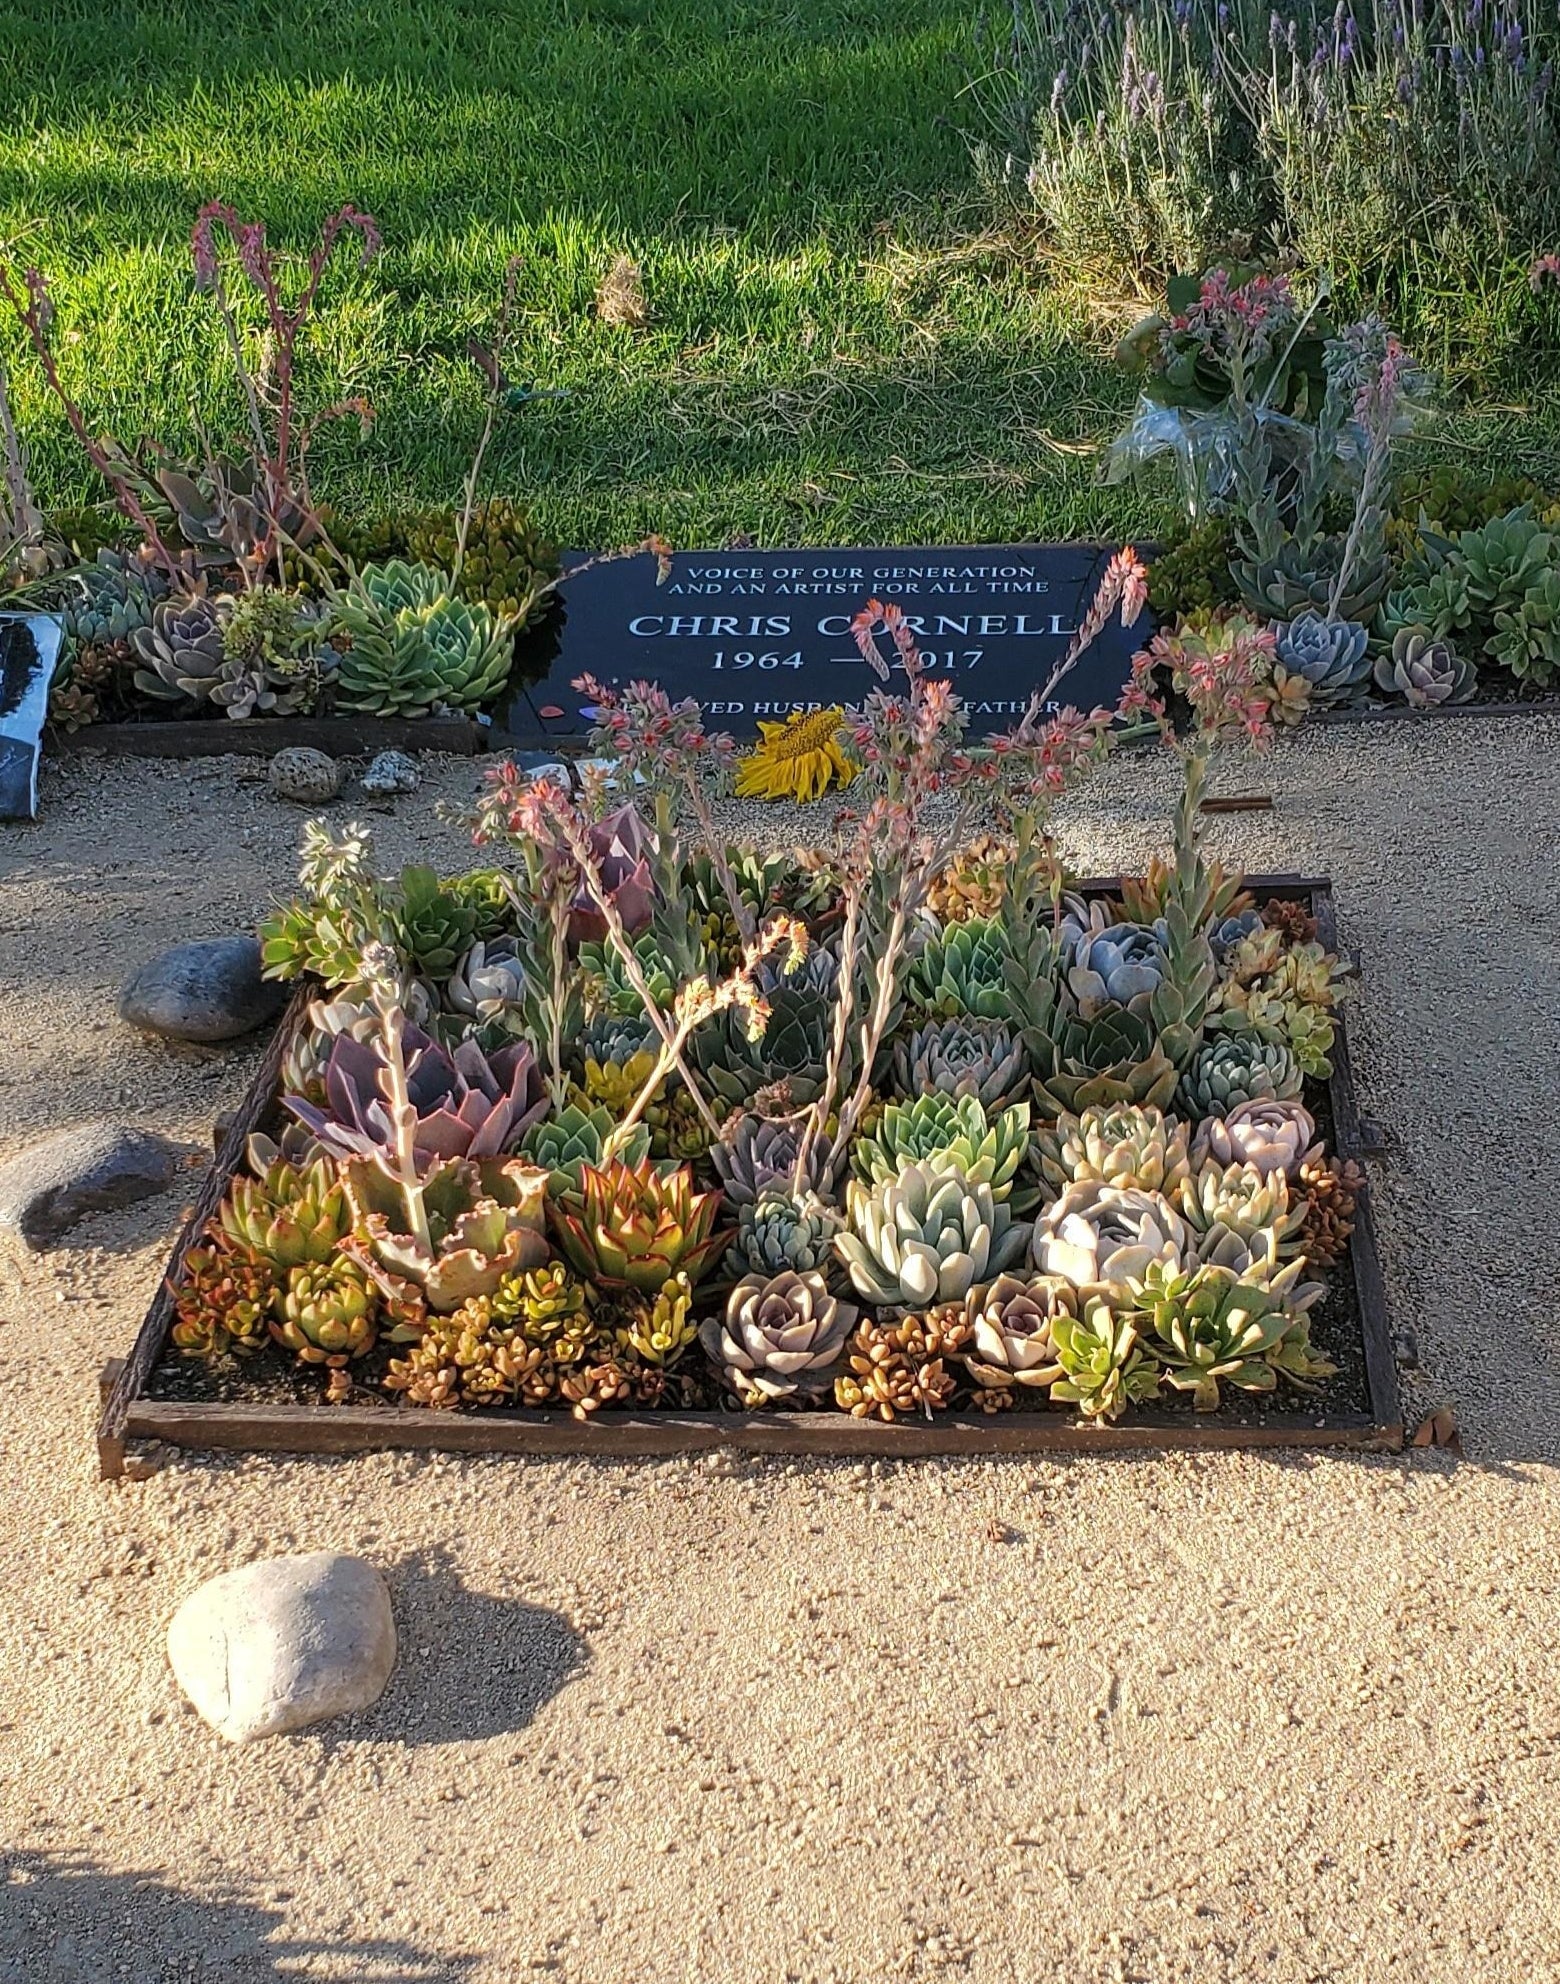 A simple grave stone on the ground with a section of succulents growing around it